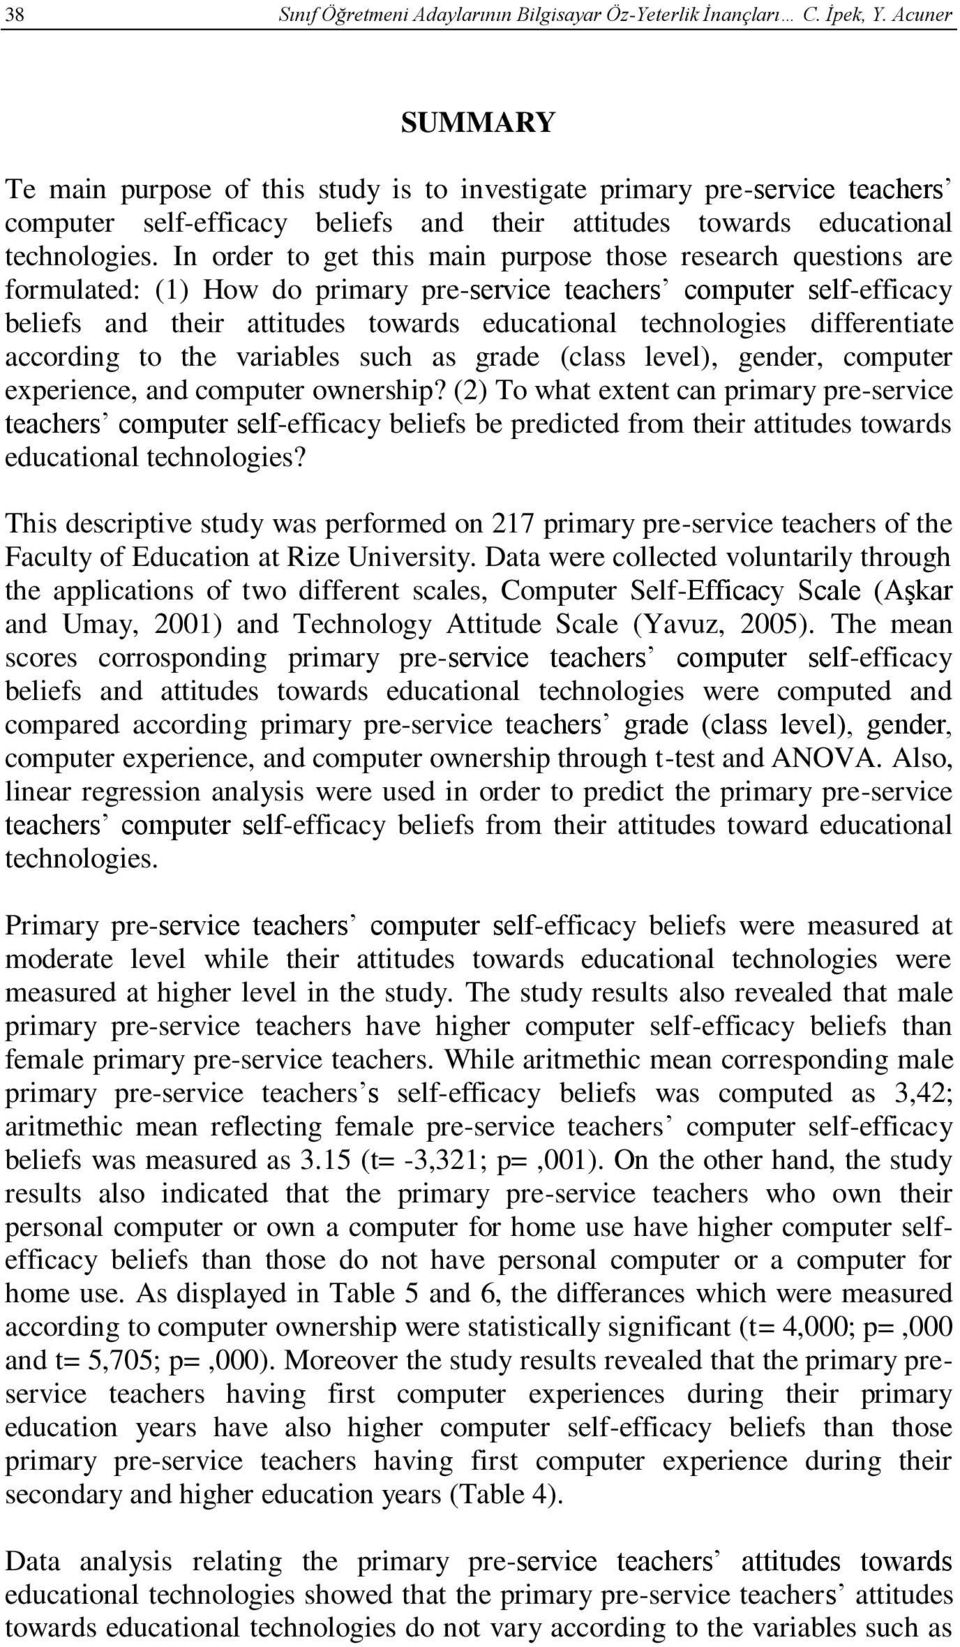 In order to get this main purpose those research questions are formulated: (1) How do primary pre-service teachers computer self-efficacy beliefs and their attitudes towards educational technologies